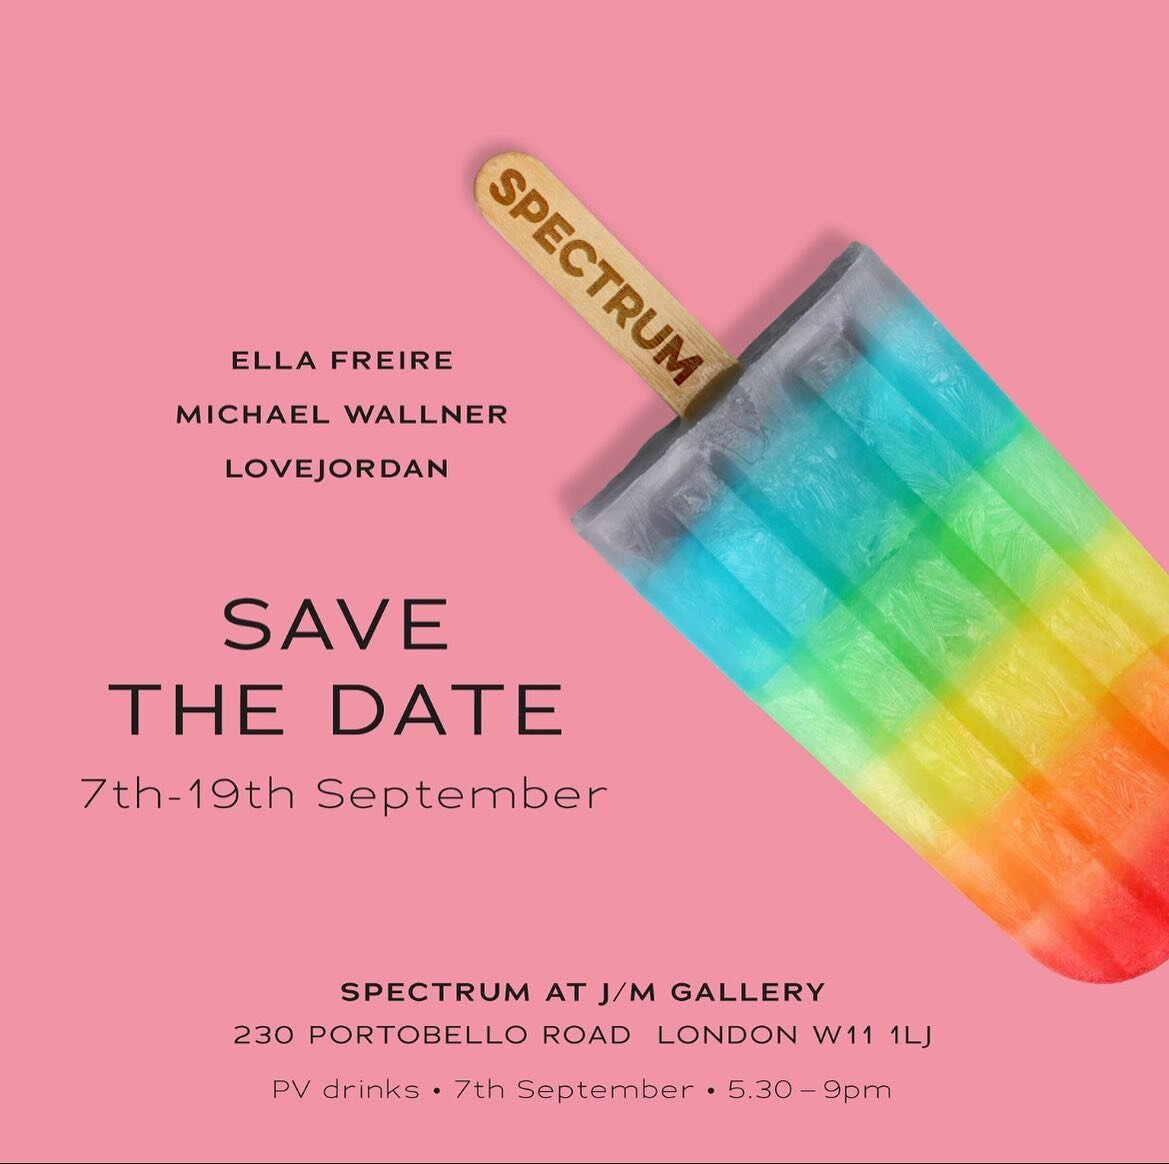 Save the date! &ldquo; Spectrum', our group show coming to @jmgallerylondon Portobello London, 7th - 19th September.

We will be hosting a PV drinks on our launch night of the 7th September 5.30-9pm 

@lovejordanart @ella_freire and @michaelwallner_a